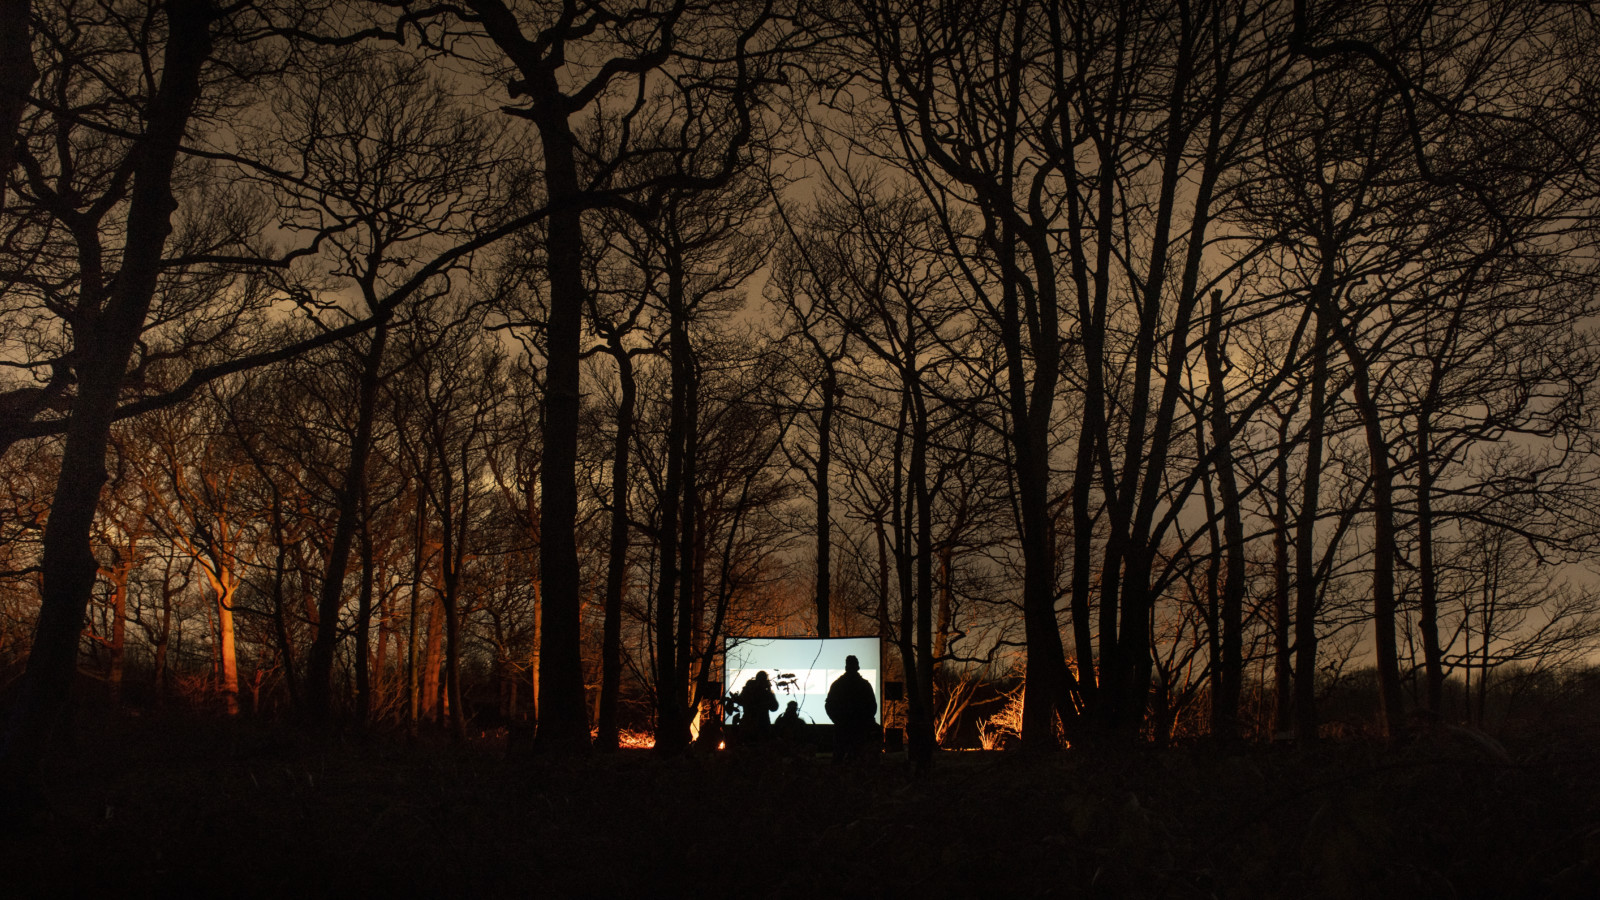 A large projection screen sits amongst winter forest at dusk. The screen reflects a bright white image, turning its small audience into black silhouettes.